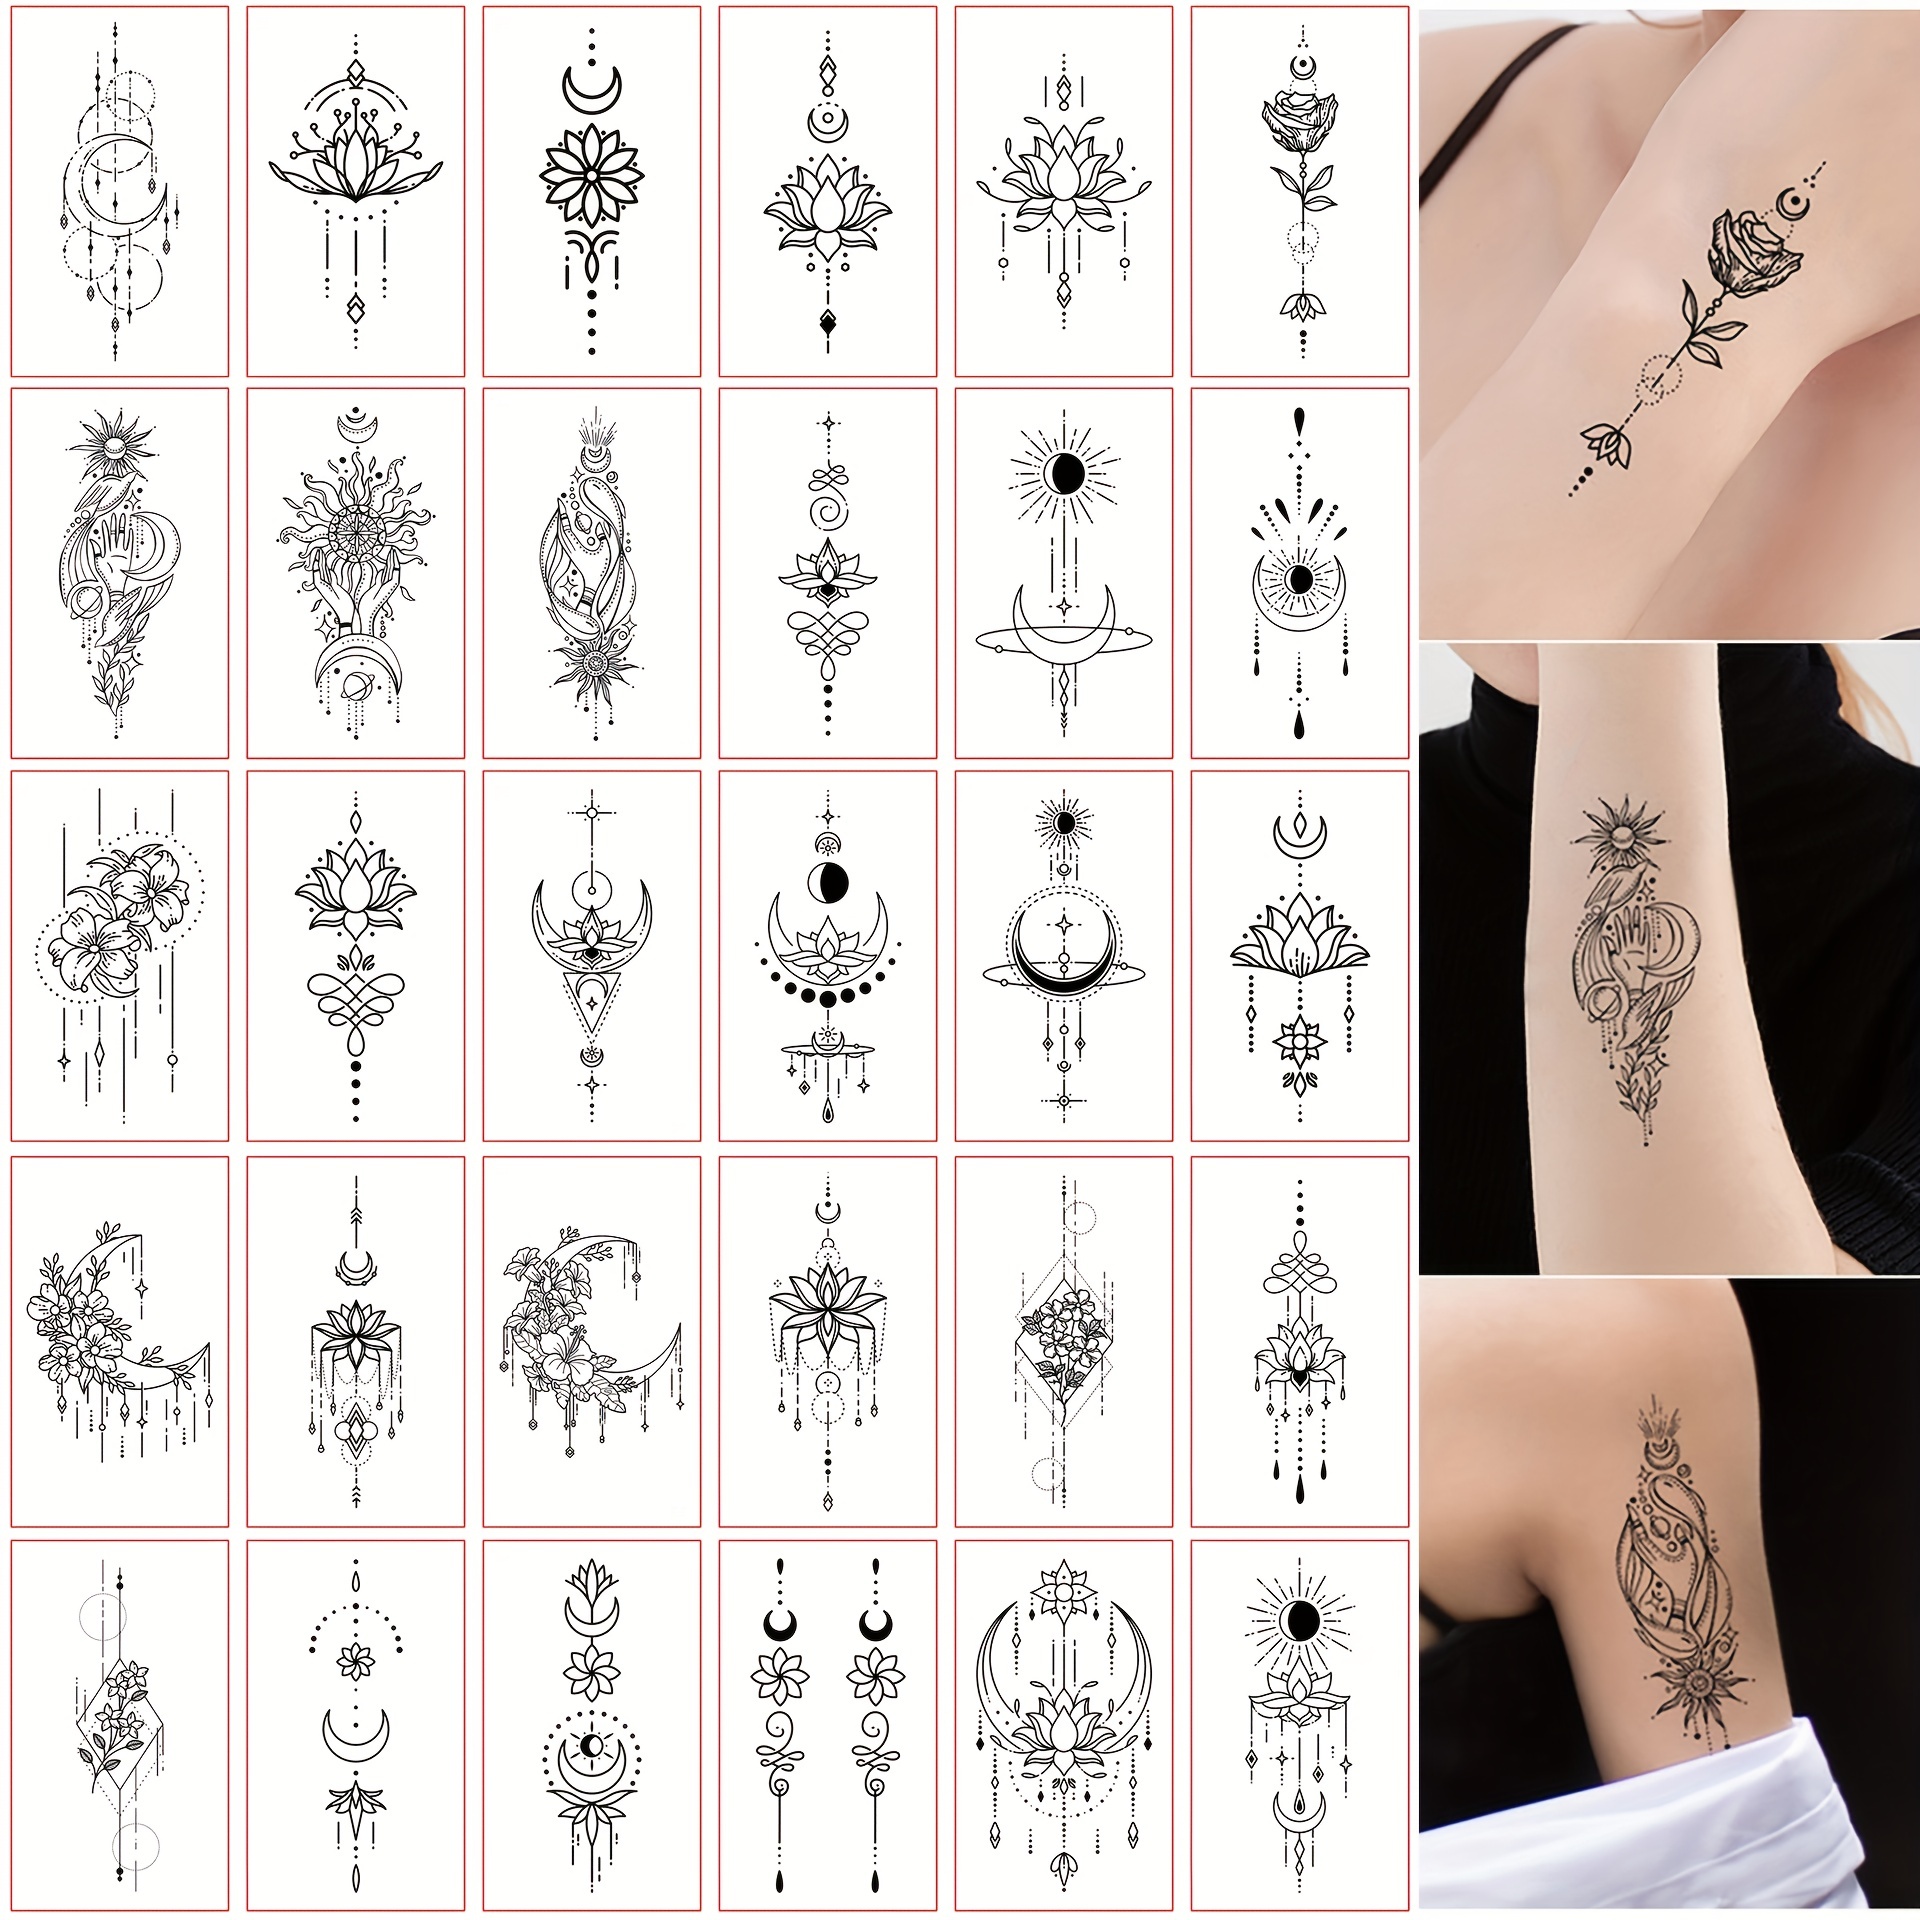 Oottati 2 Sheets Arm Thigh Leg Waterproof Temporary Tattoo Stickers Pink  Japanese Mask Canadian Hairless Cat Skull suit for Leg Back Thigh